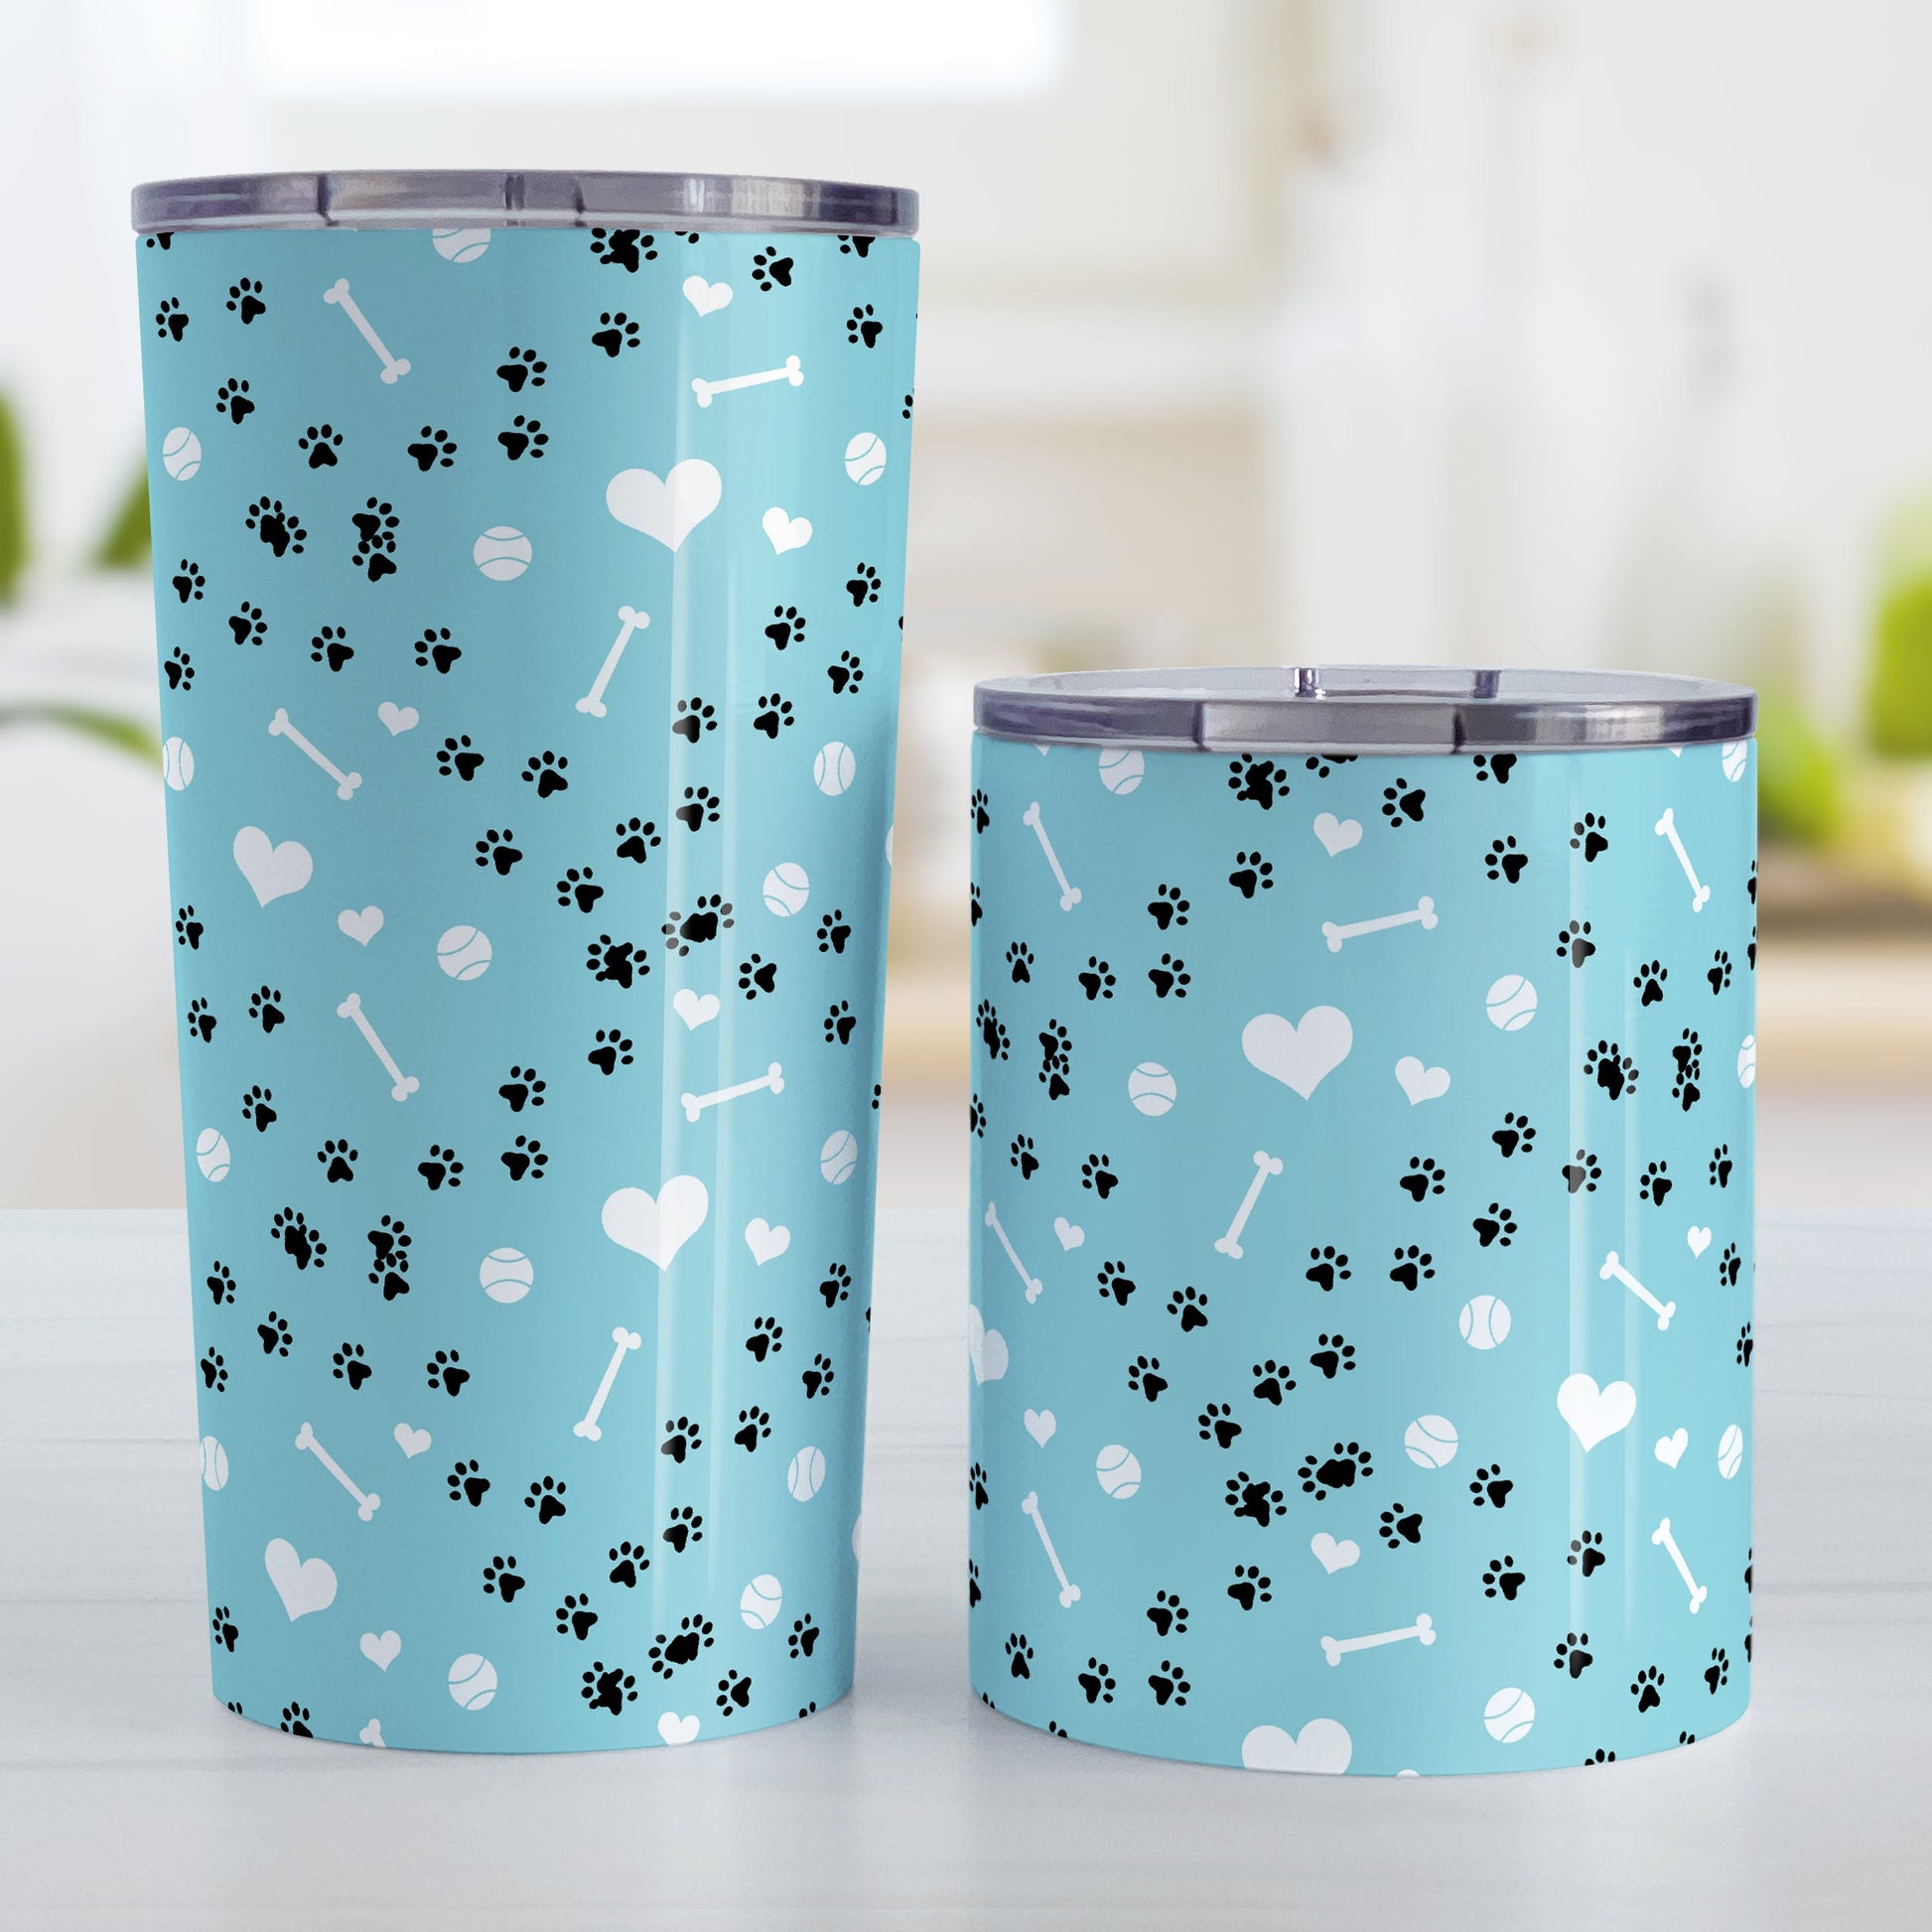 Puppy Run Blue Dog Tumbler Cup (20oz and 10oz) at Amy's Coffee Mugs. Stainless steel insulated tumbler cups designed with a pattern of chaotic tracks of puppy paw prints running around the cup with white dog bones, playing balls, and hearts over a light blue background that wraps around the cups. These cups are perfect for people who love puppy dogs, cute paw print designs, and the color blue. Photo shows both sized cups next to each other. 